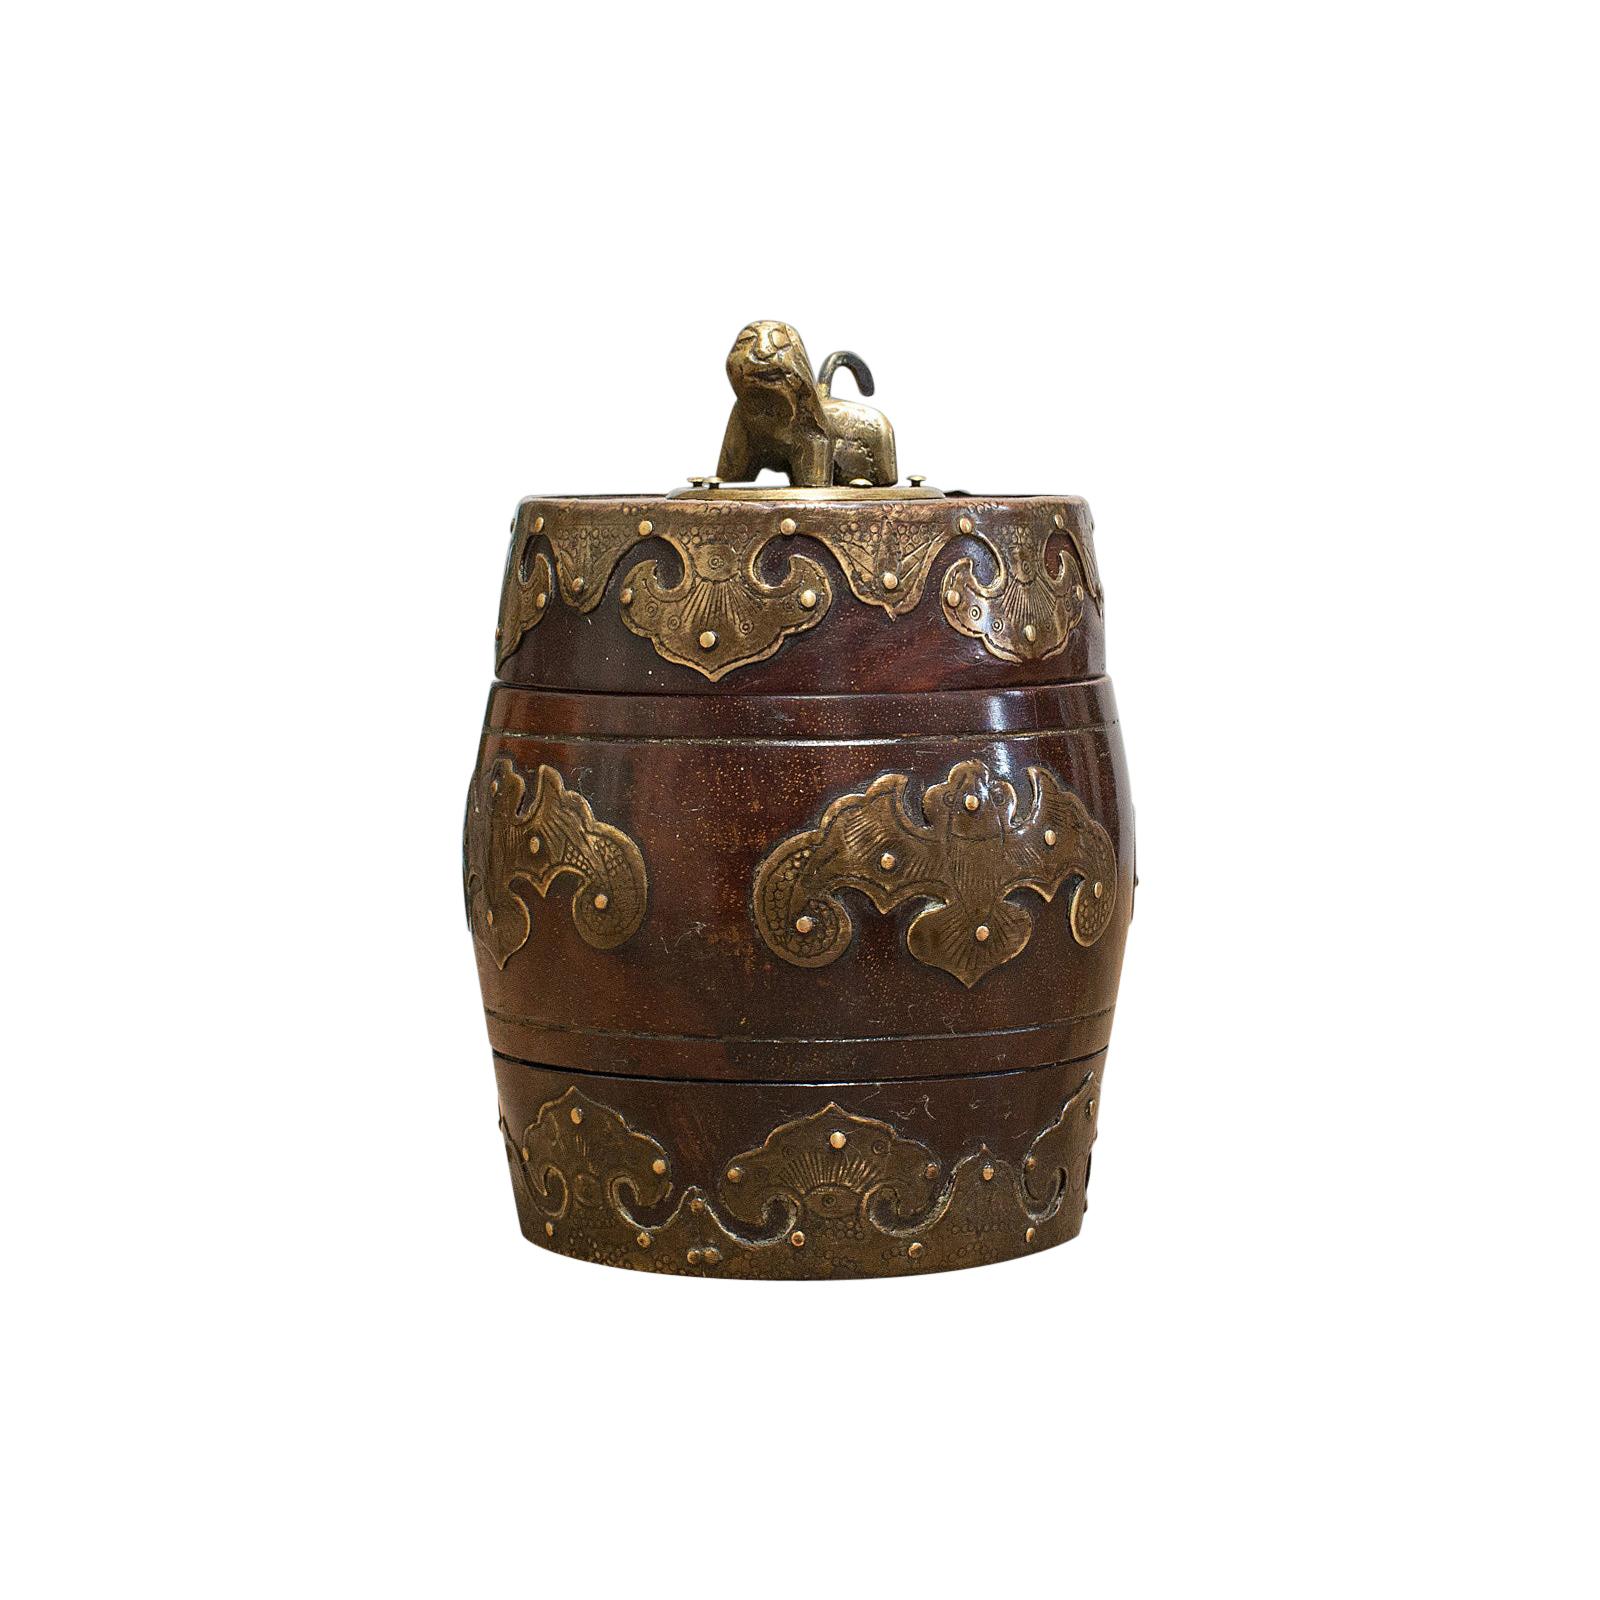 Small Antique Spice Jar, Chinese, Mahogany, Brass, Decorative Pot, Victorian For Sale